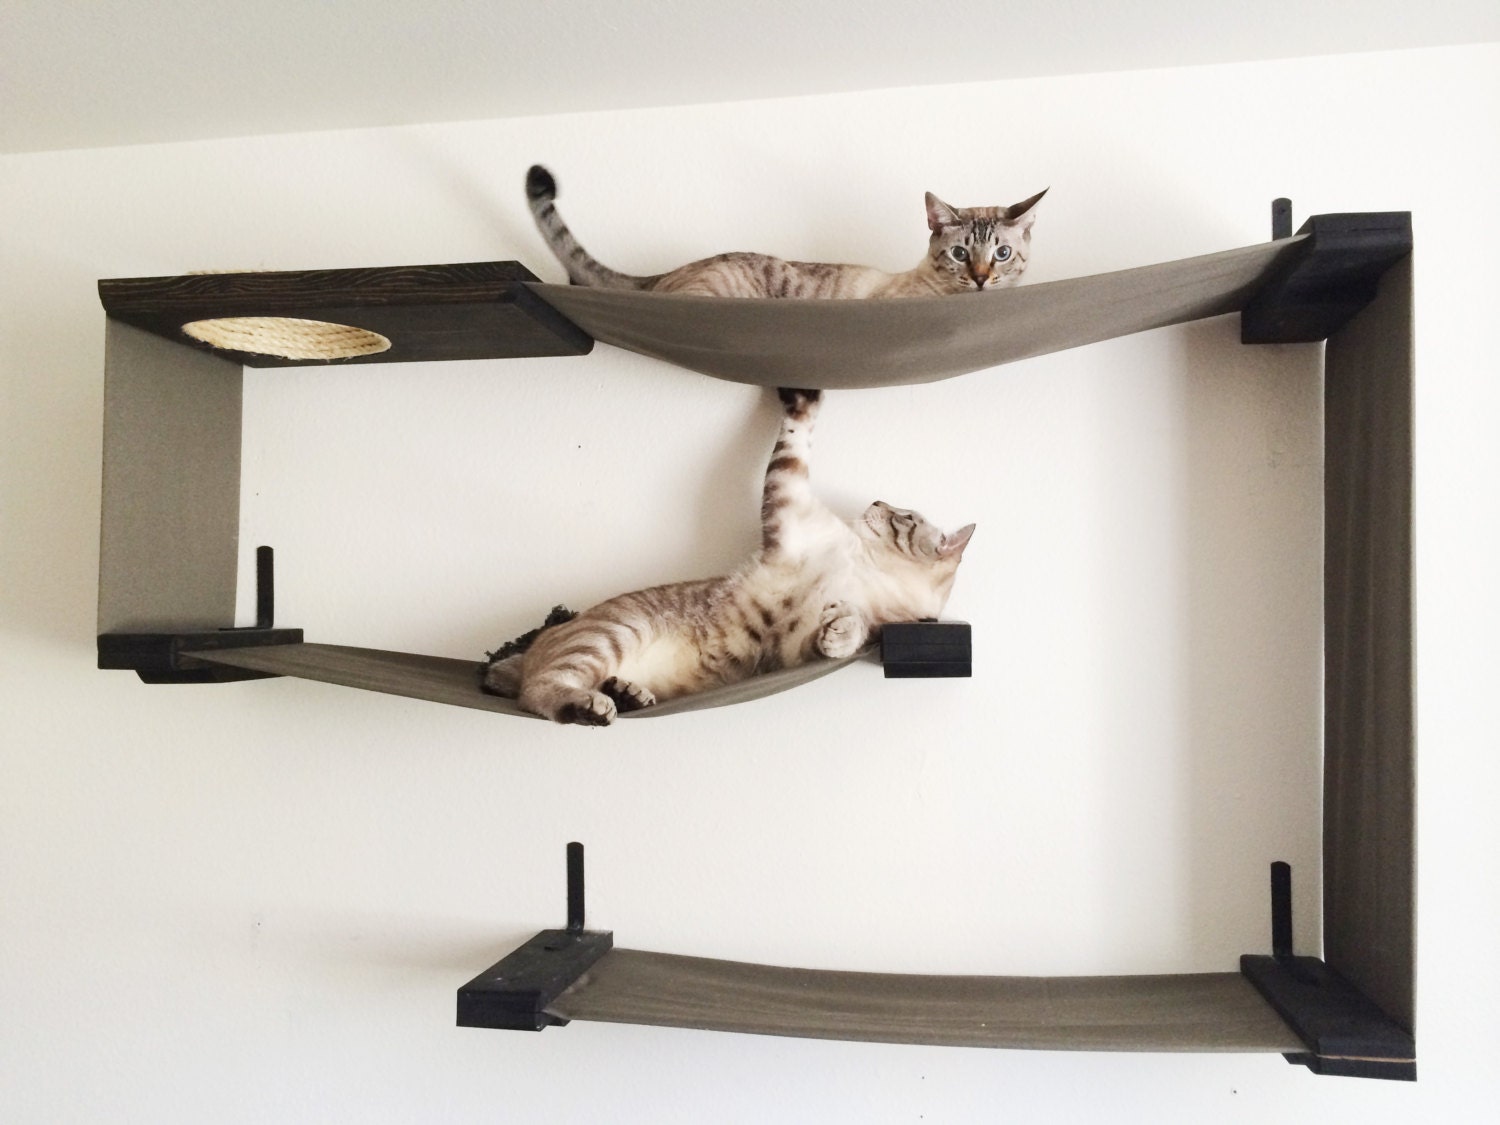 Fabric Cat Maze Cat Hammock Shelves by CatastrophiCreations